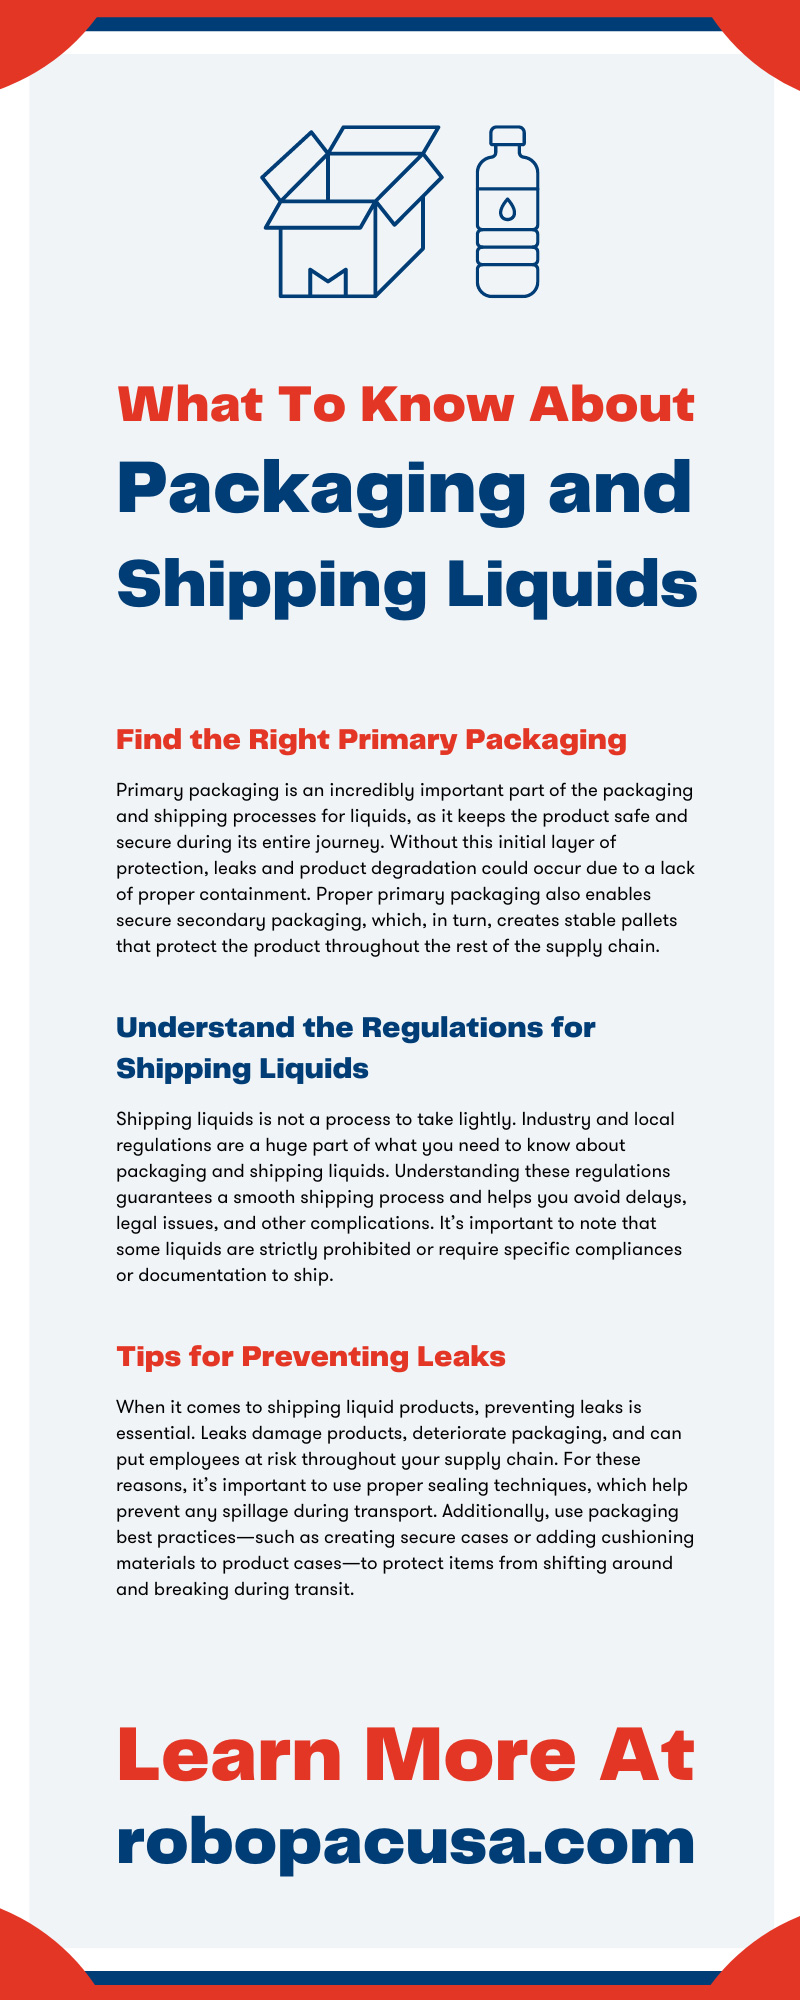 What To Know About Packaging and Shipping Liquids